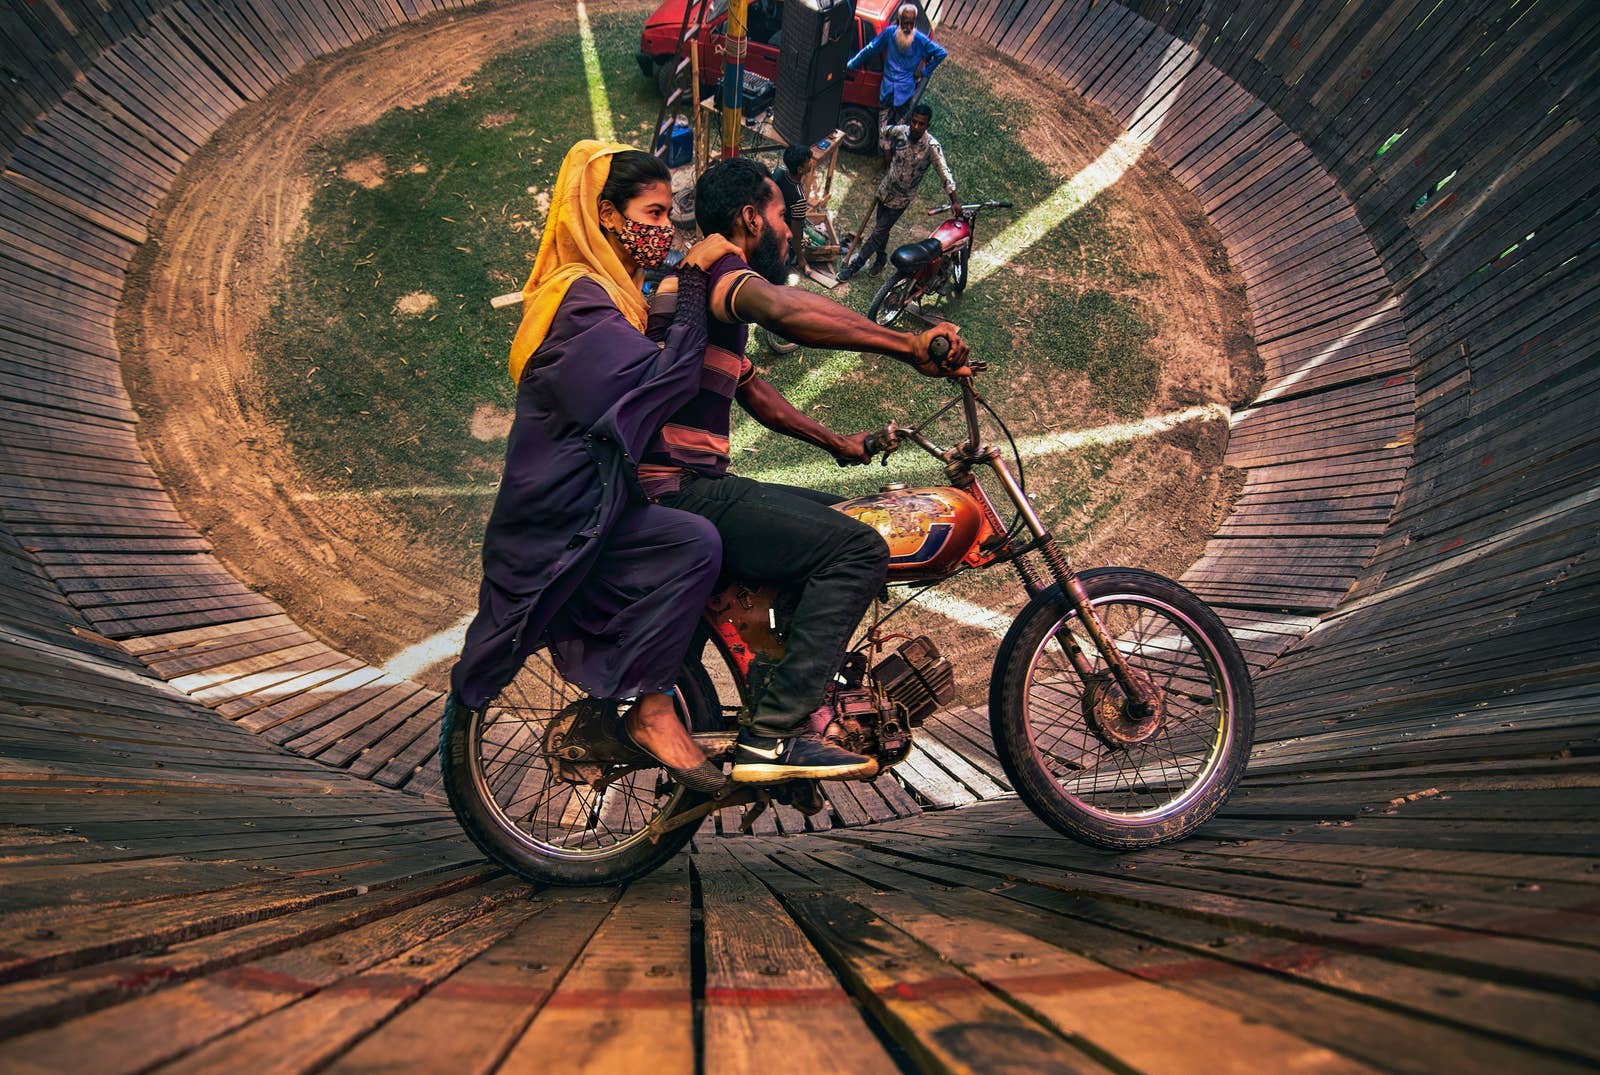 An aerial view looking into the &quot;Well Of Death,&quot; where a man and woman ride a motorcycle around a barrel shaped cylinder, nearly vertical to the ground.